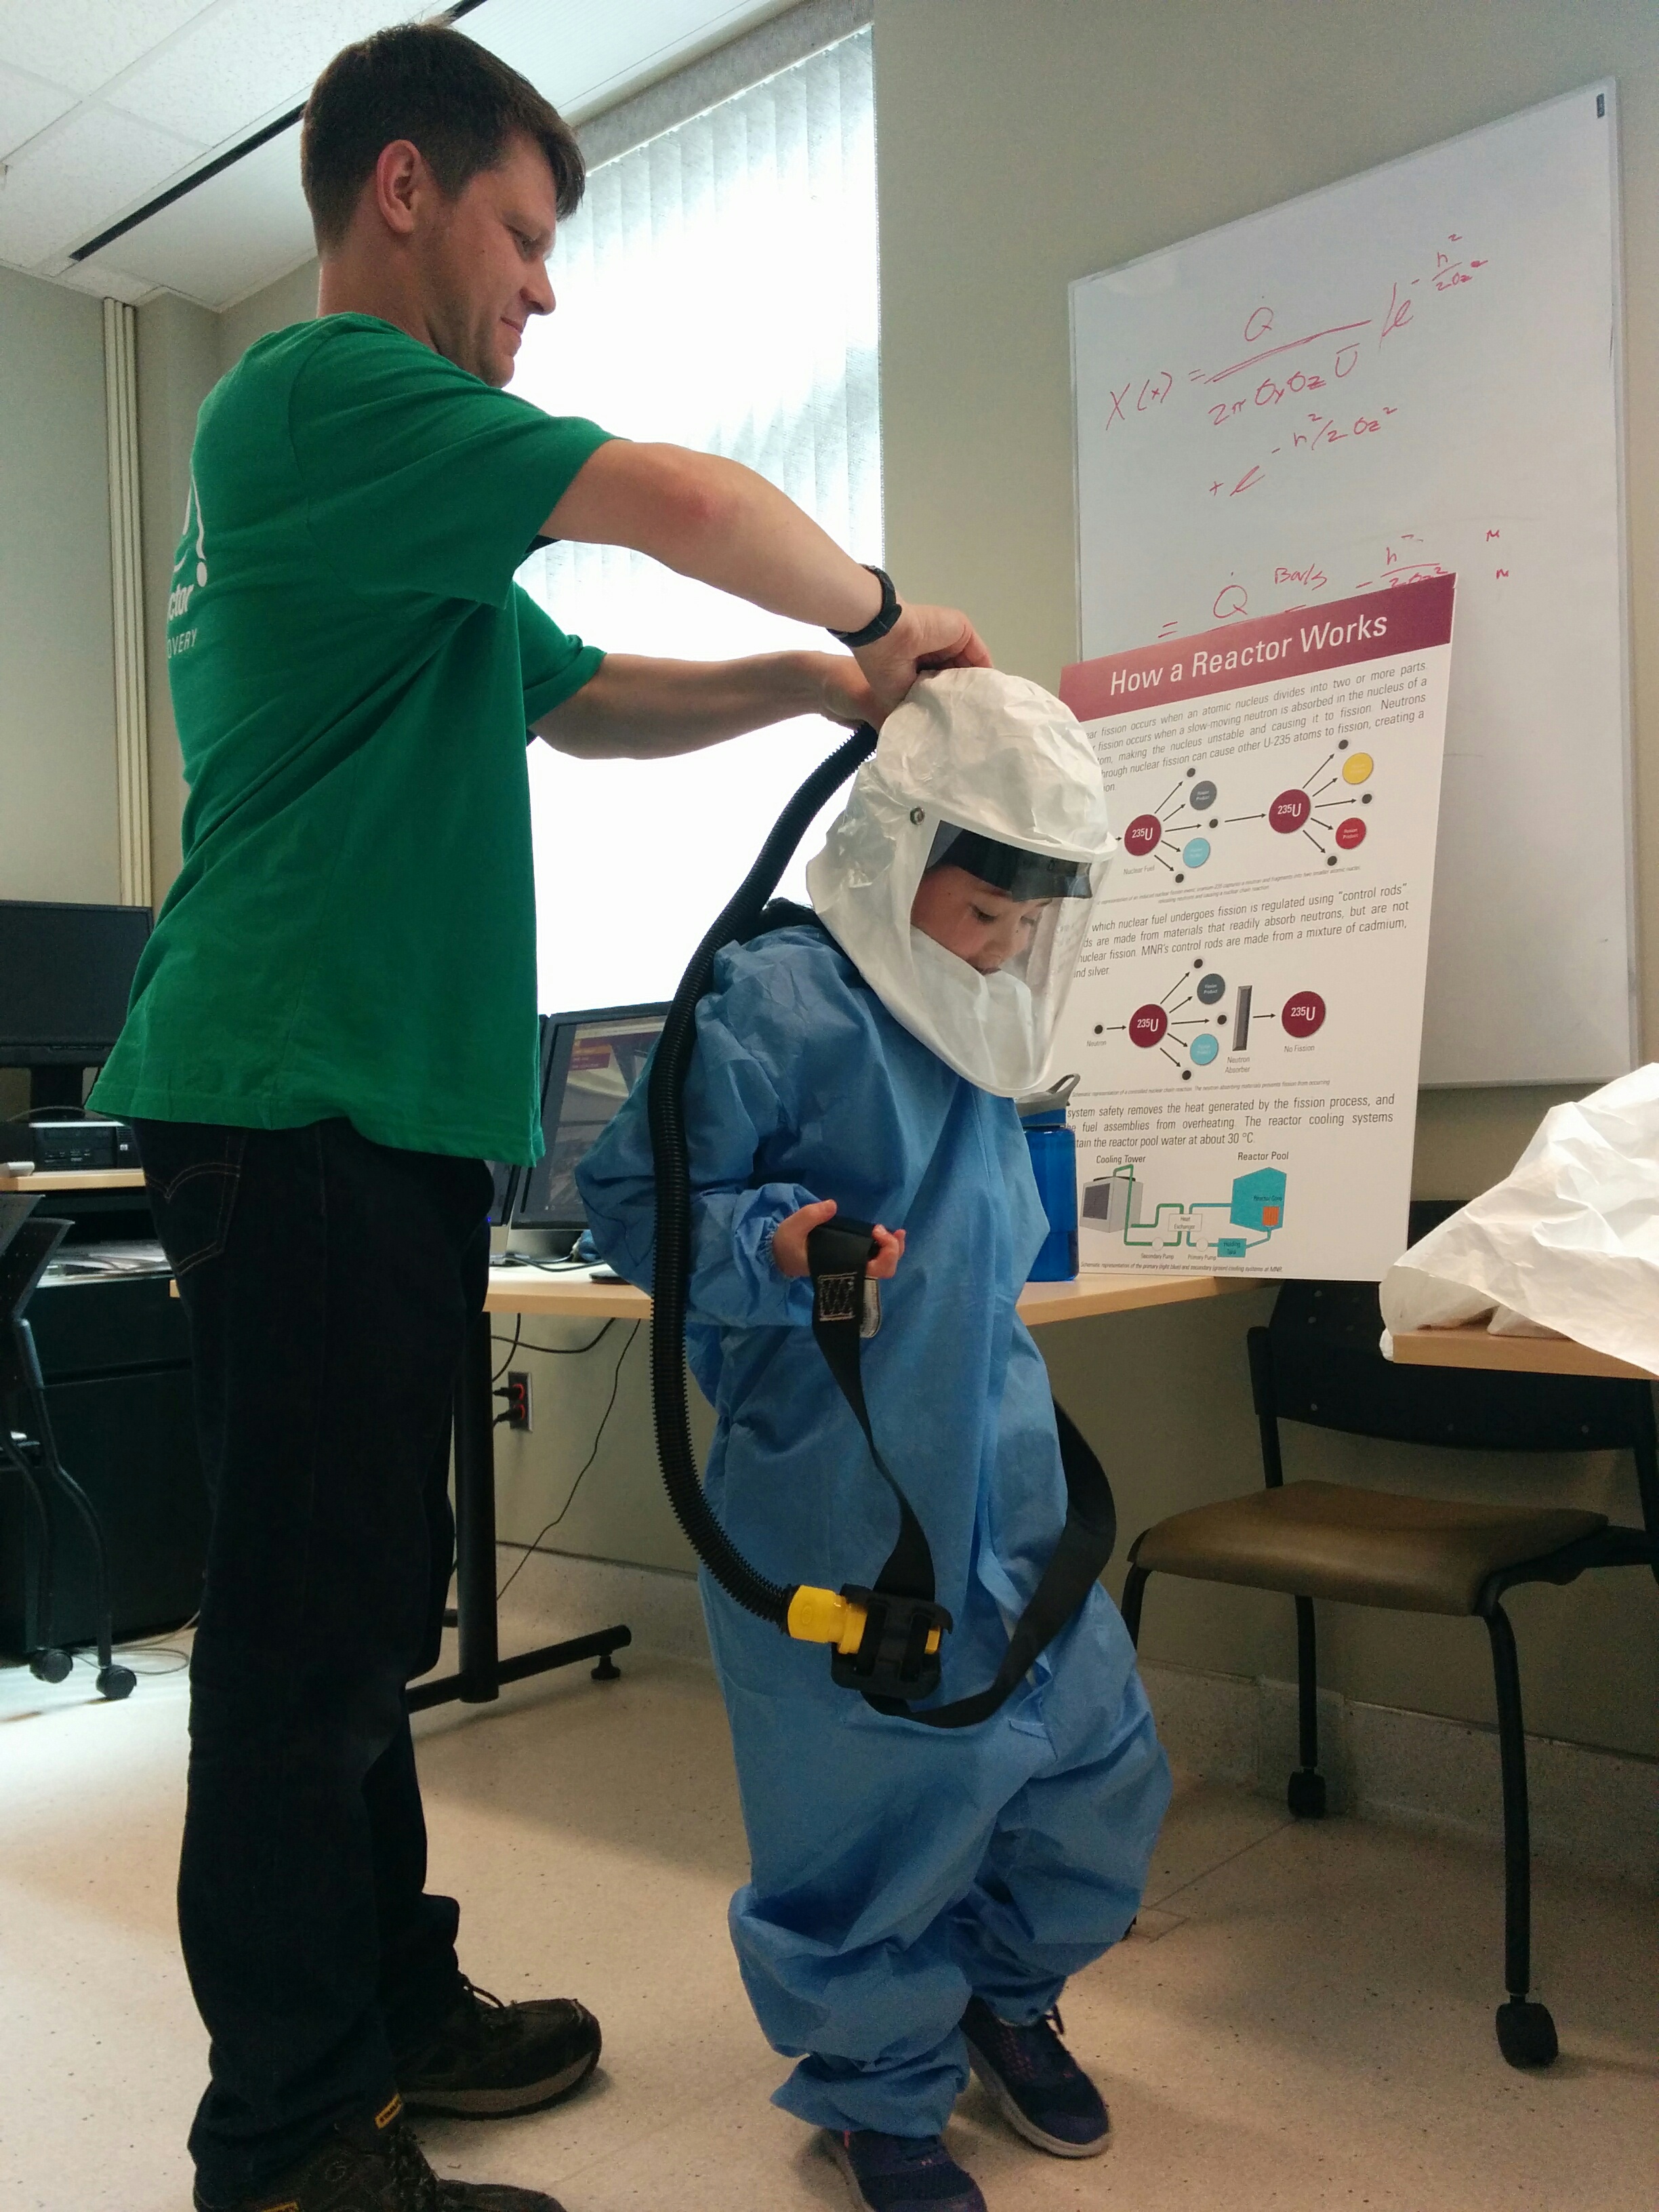 A McMaster staff member helps a visitor put on PPE.